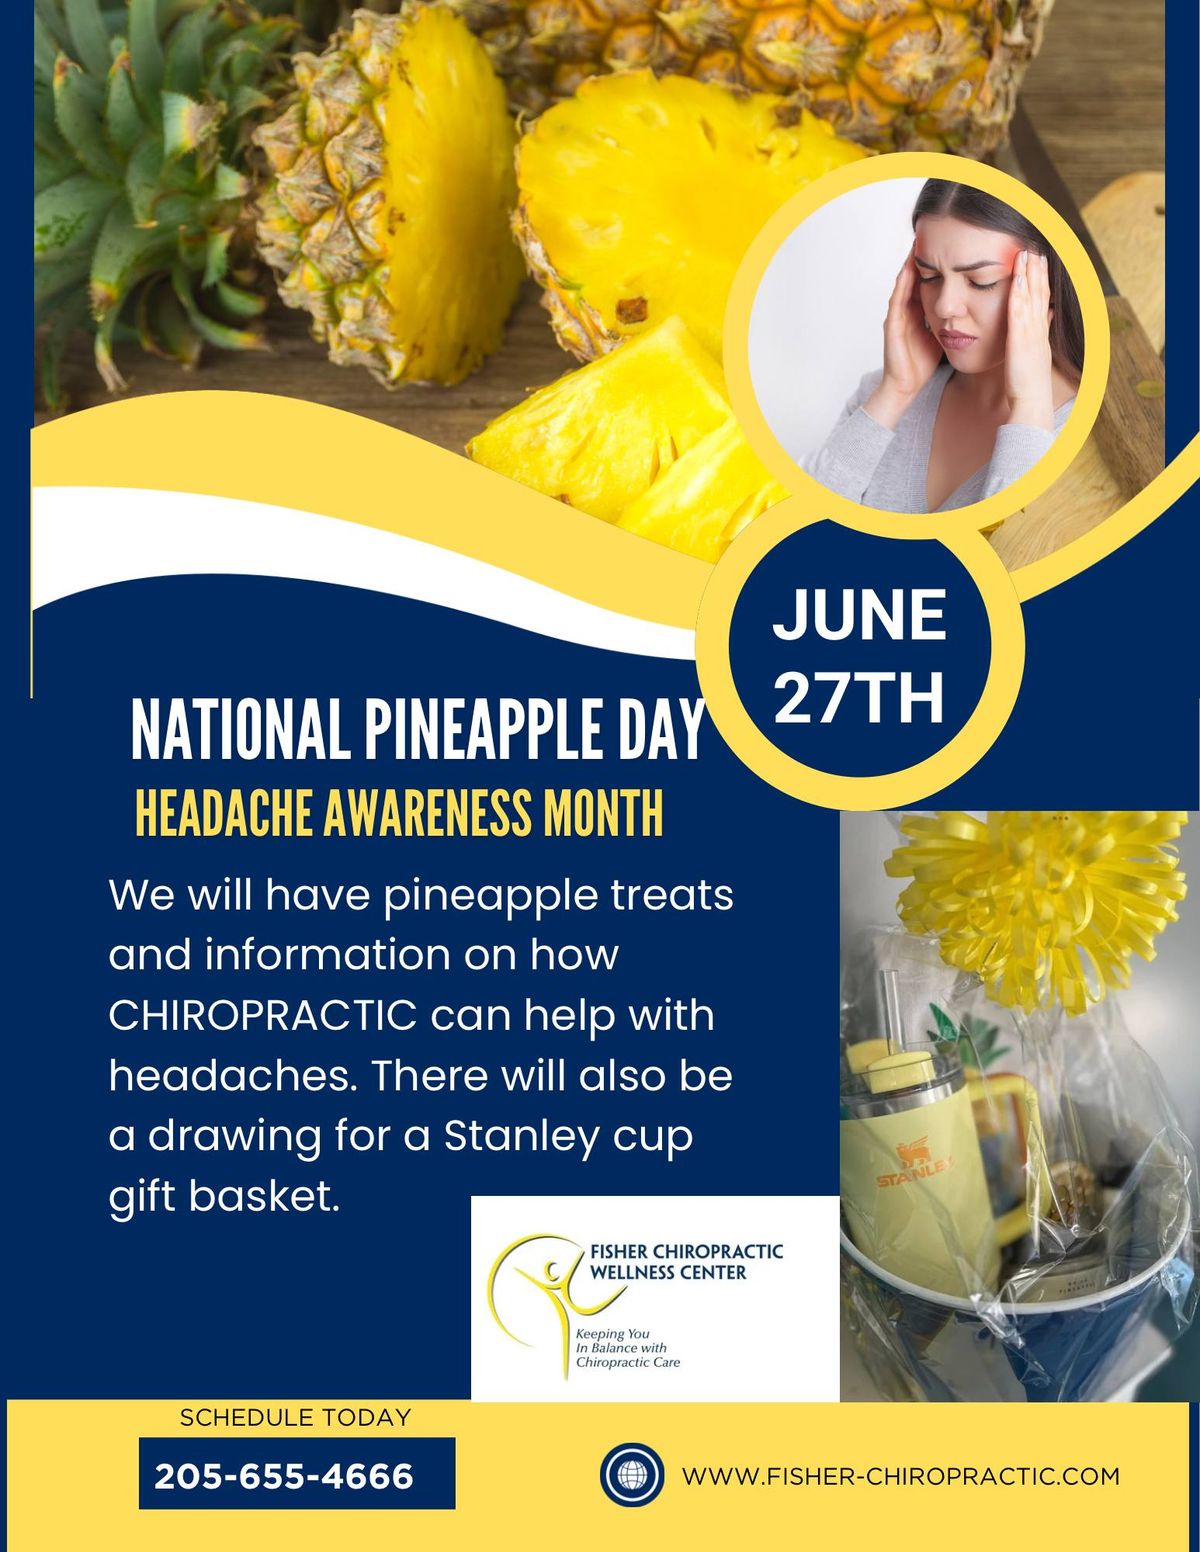 National Pineapple Day and Headache Awareness Month